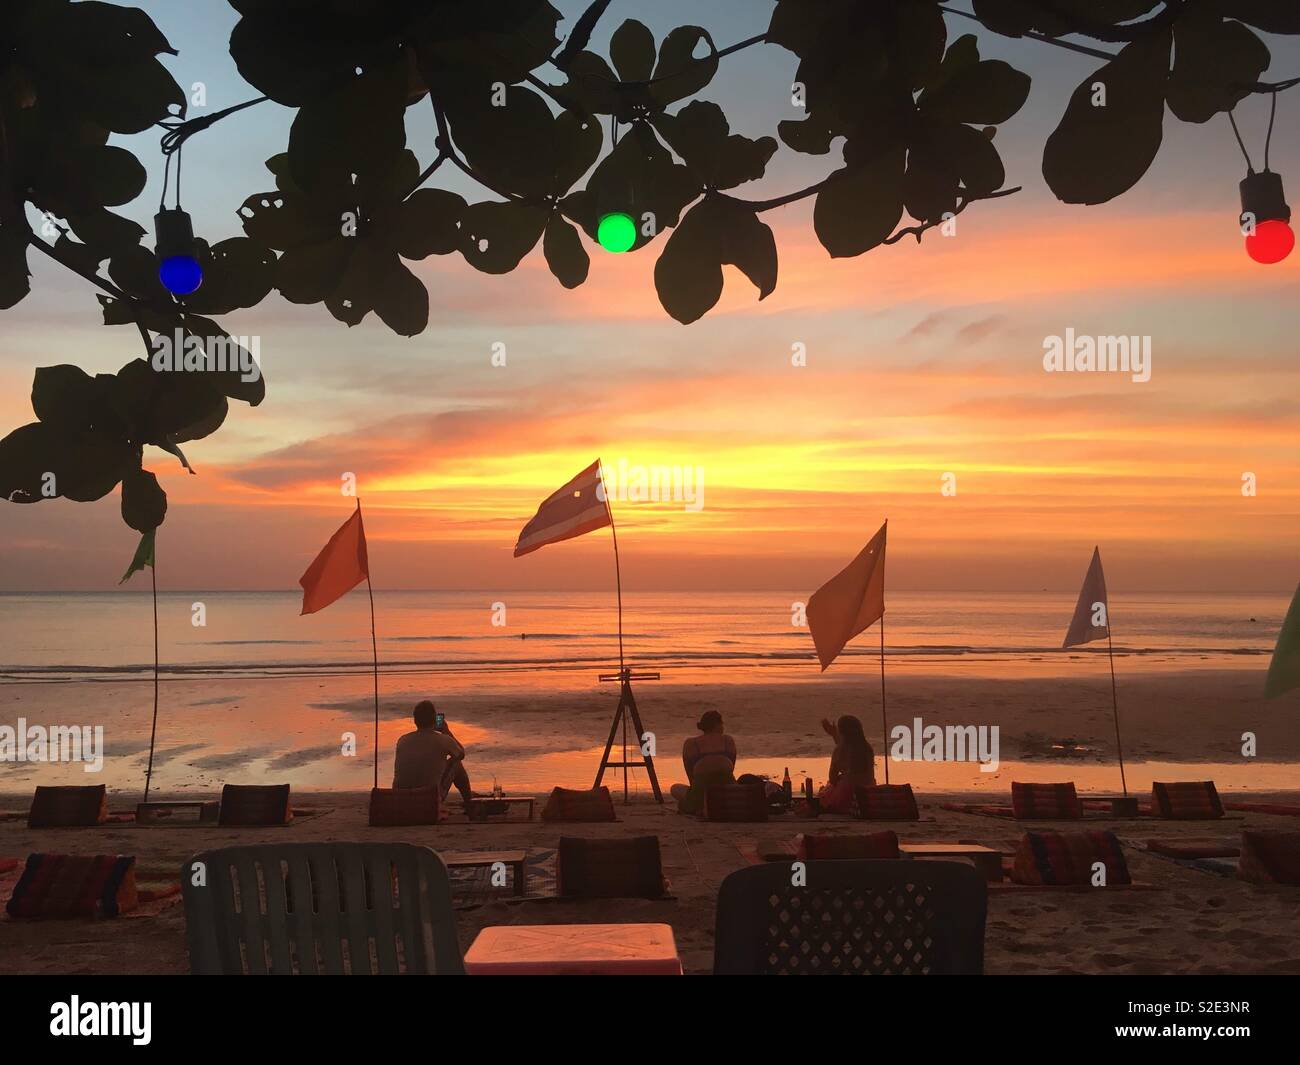 Sunset on the beach in Thailand with flags Stock Photo